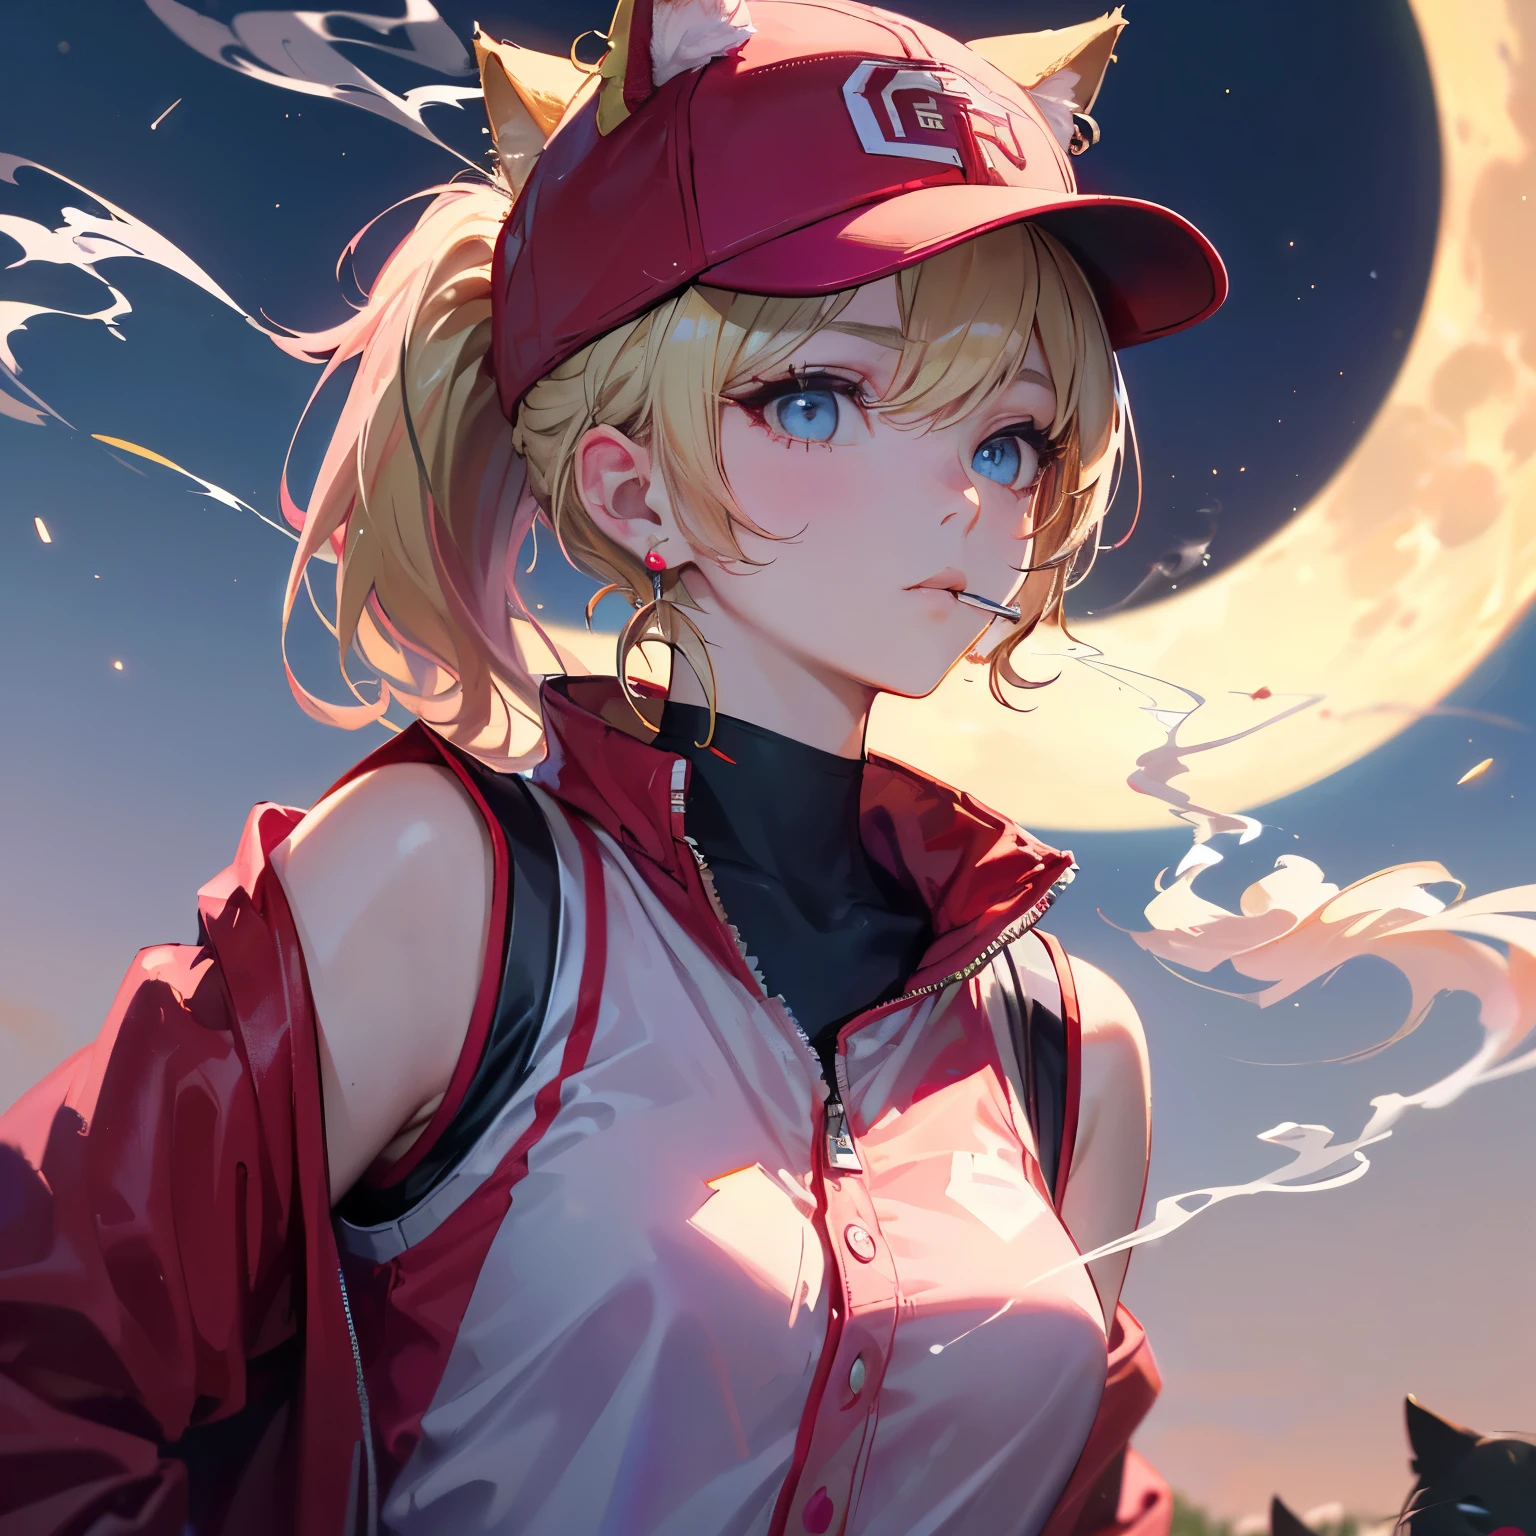 (((pink and Blonde hair　short ponytail　Wear a cap)))　((cyber punk　Earrings　Smoke a cigarette  solo))　((Shining Moon　Shining Background)) ,((Cat ears)), ((Sleeveless)),((Wine Red Baseball Cap)),((Wearing a wine red baseball uniform))、((Red jacket))、Pale blue eyes,Closed Mouth、Hoop Earrings, Jewelry,(Best Quality, 8k, Oil painting, Mastepiece:1.2), Super detailed, (Realism, It&#39;s photorealistic:1.37), (((Bust Shot))),